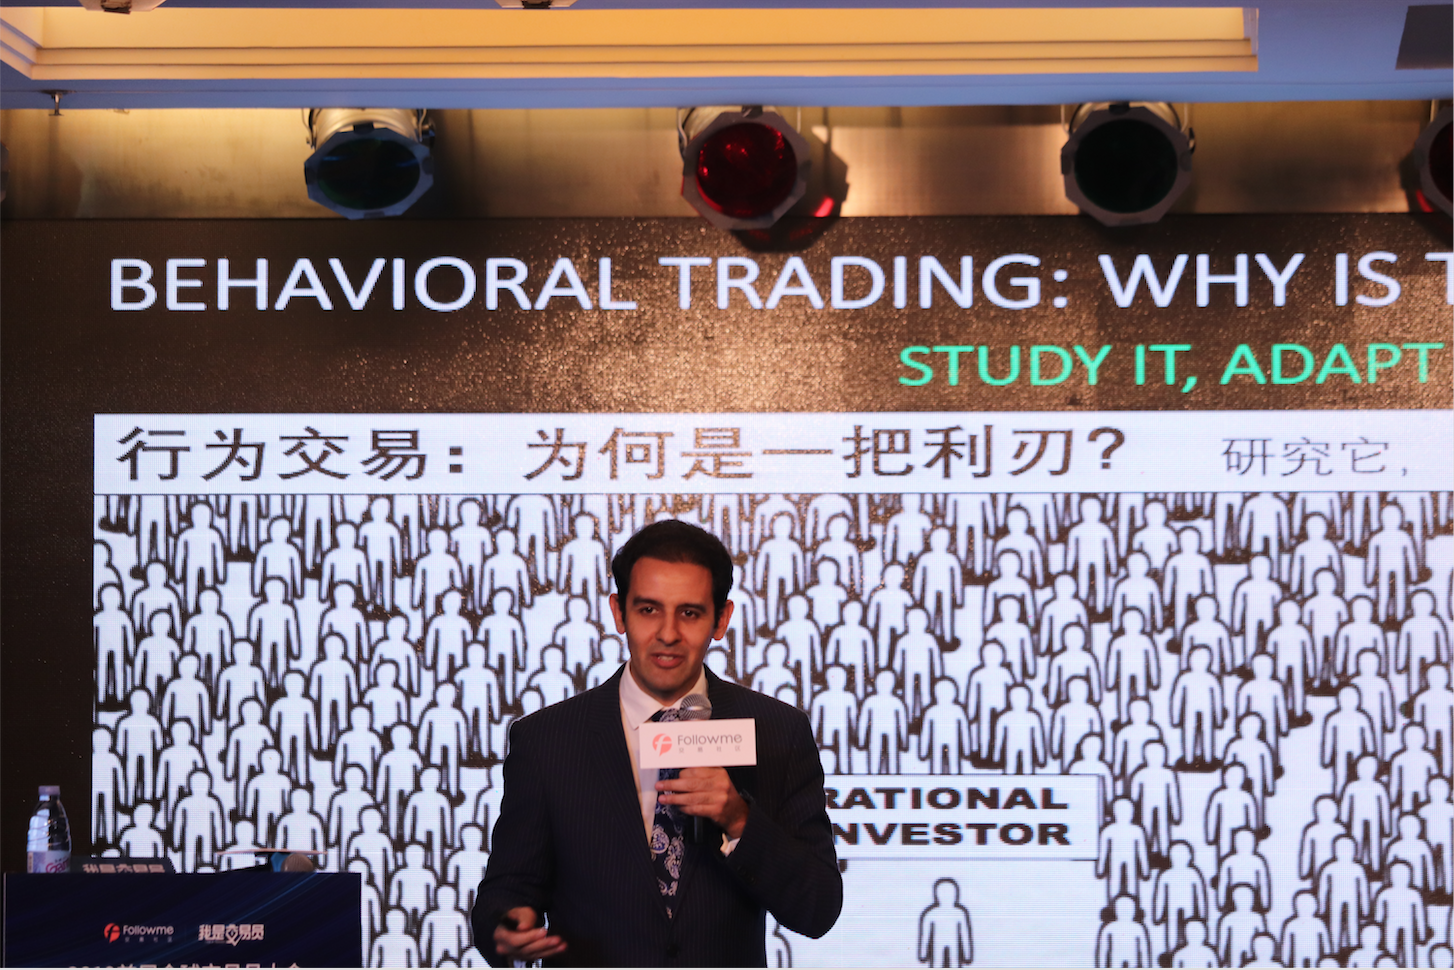 More Than Trade: Followme the First Global Trader Conference 2019